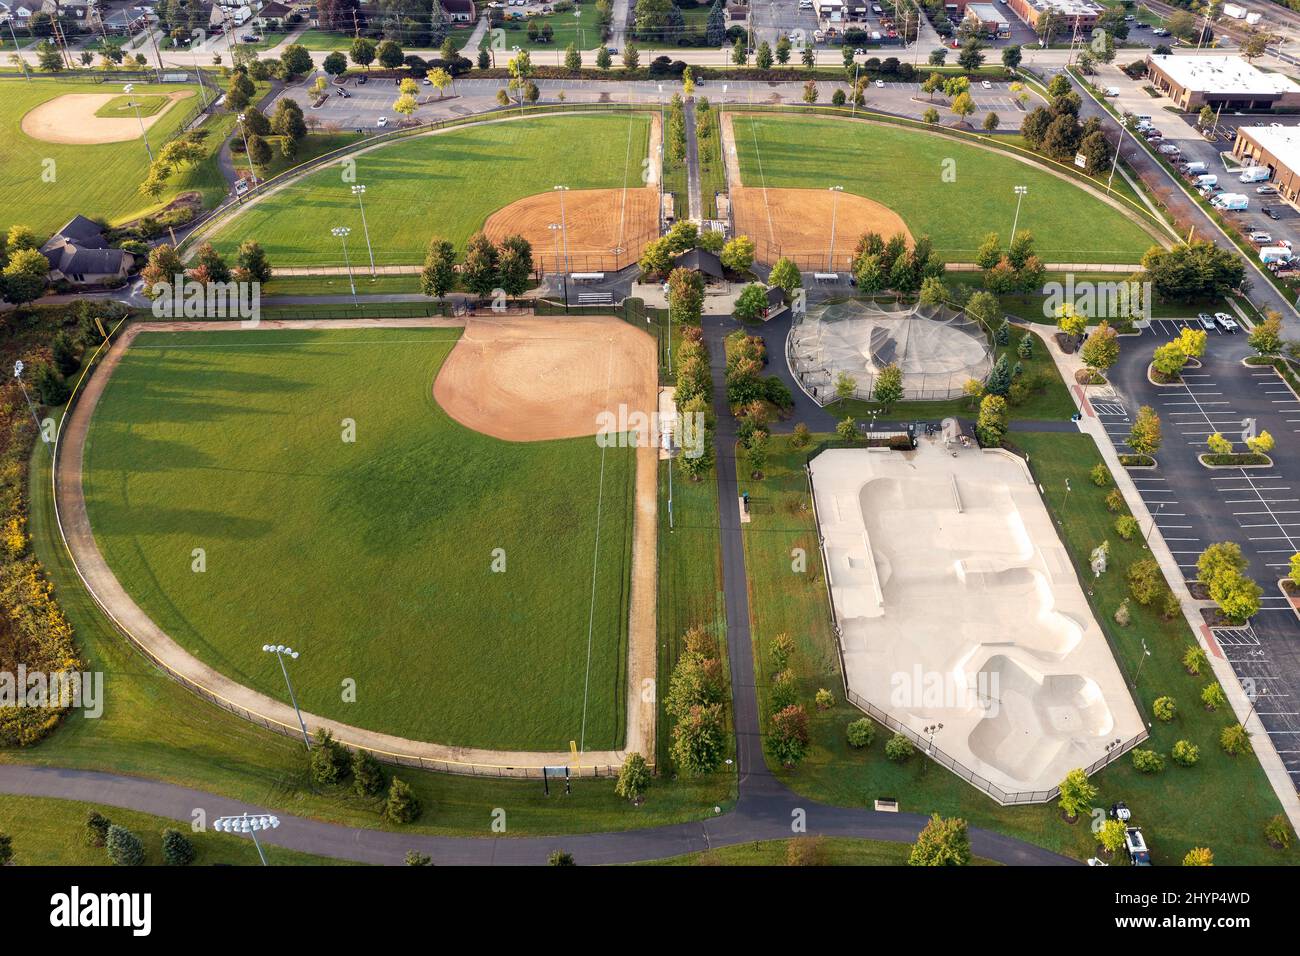 Aerial view of a sports complex with baseball/softball diamonds, a skate park and batting cages. Stock Photo